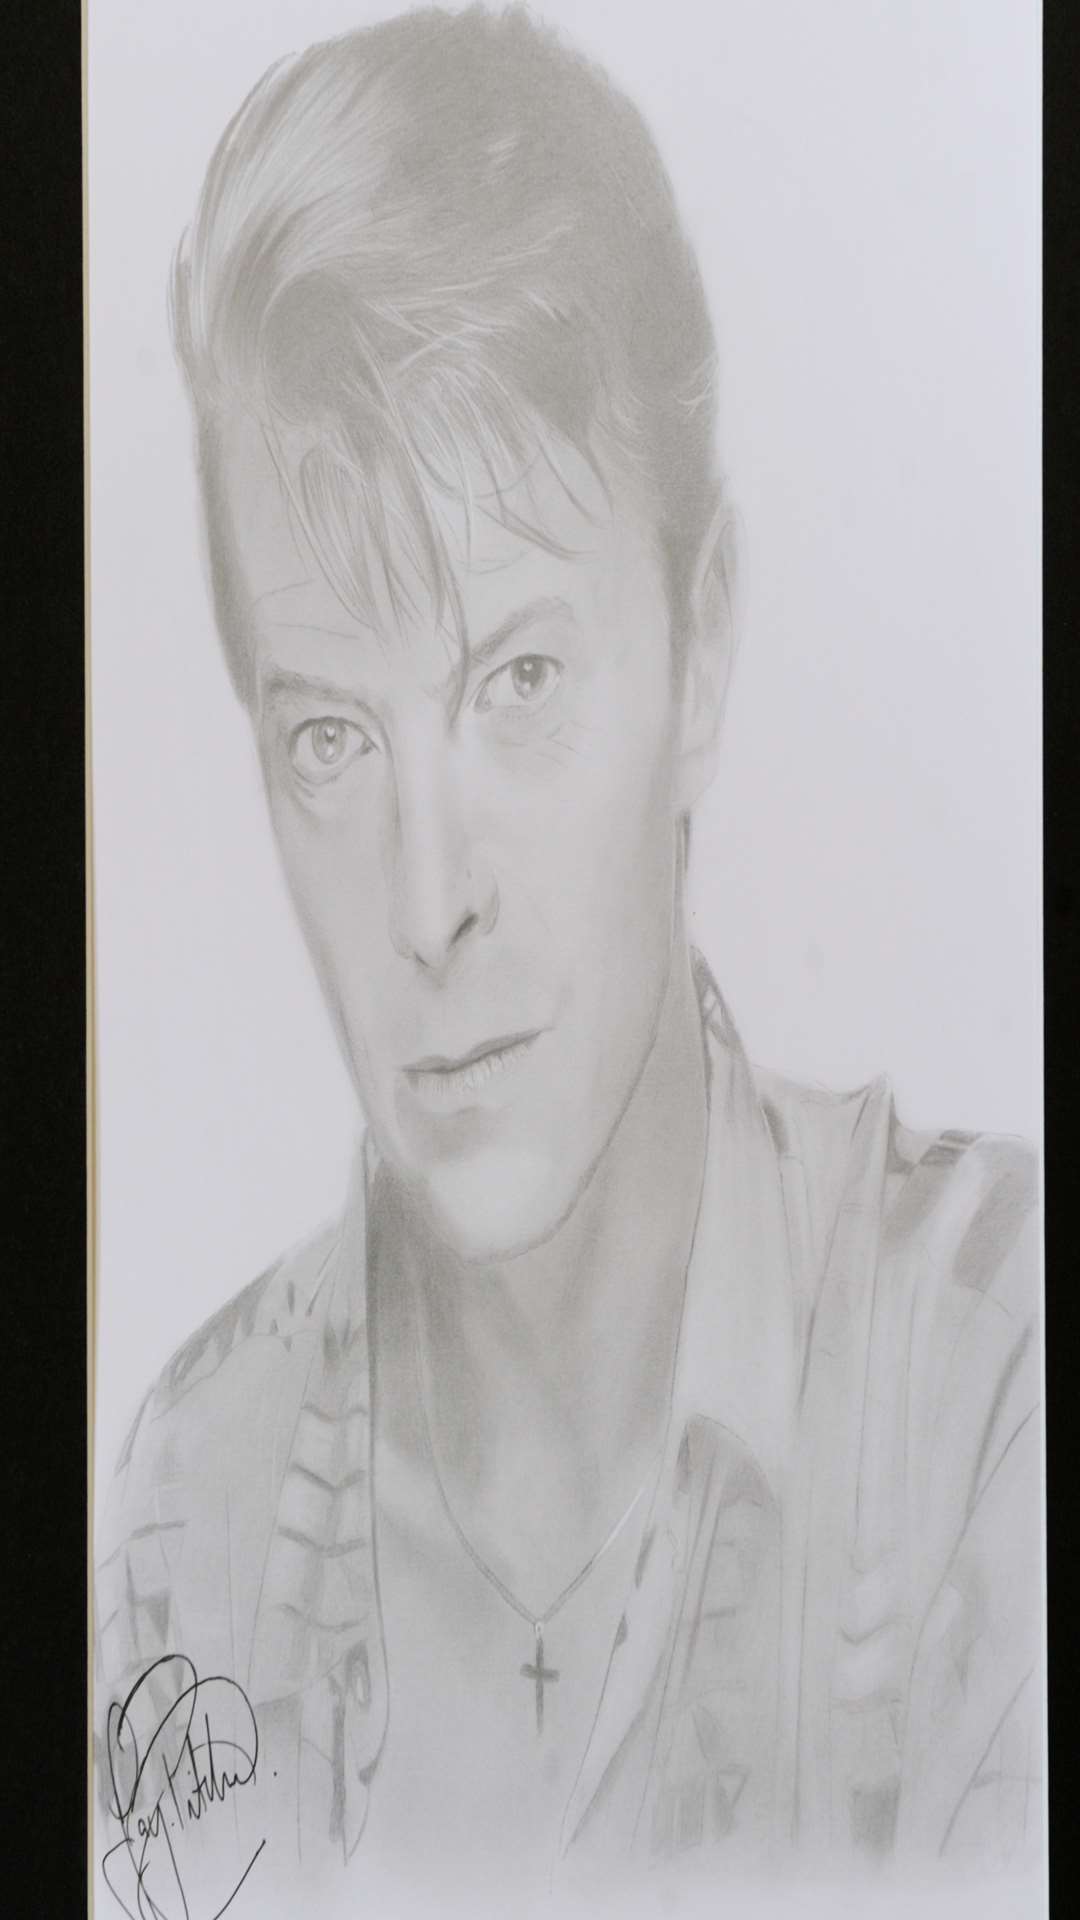 Jay's stunning Bowie sketch sold for £132.